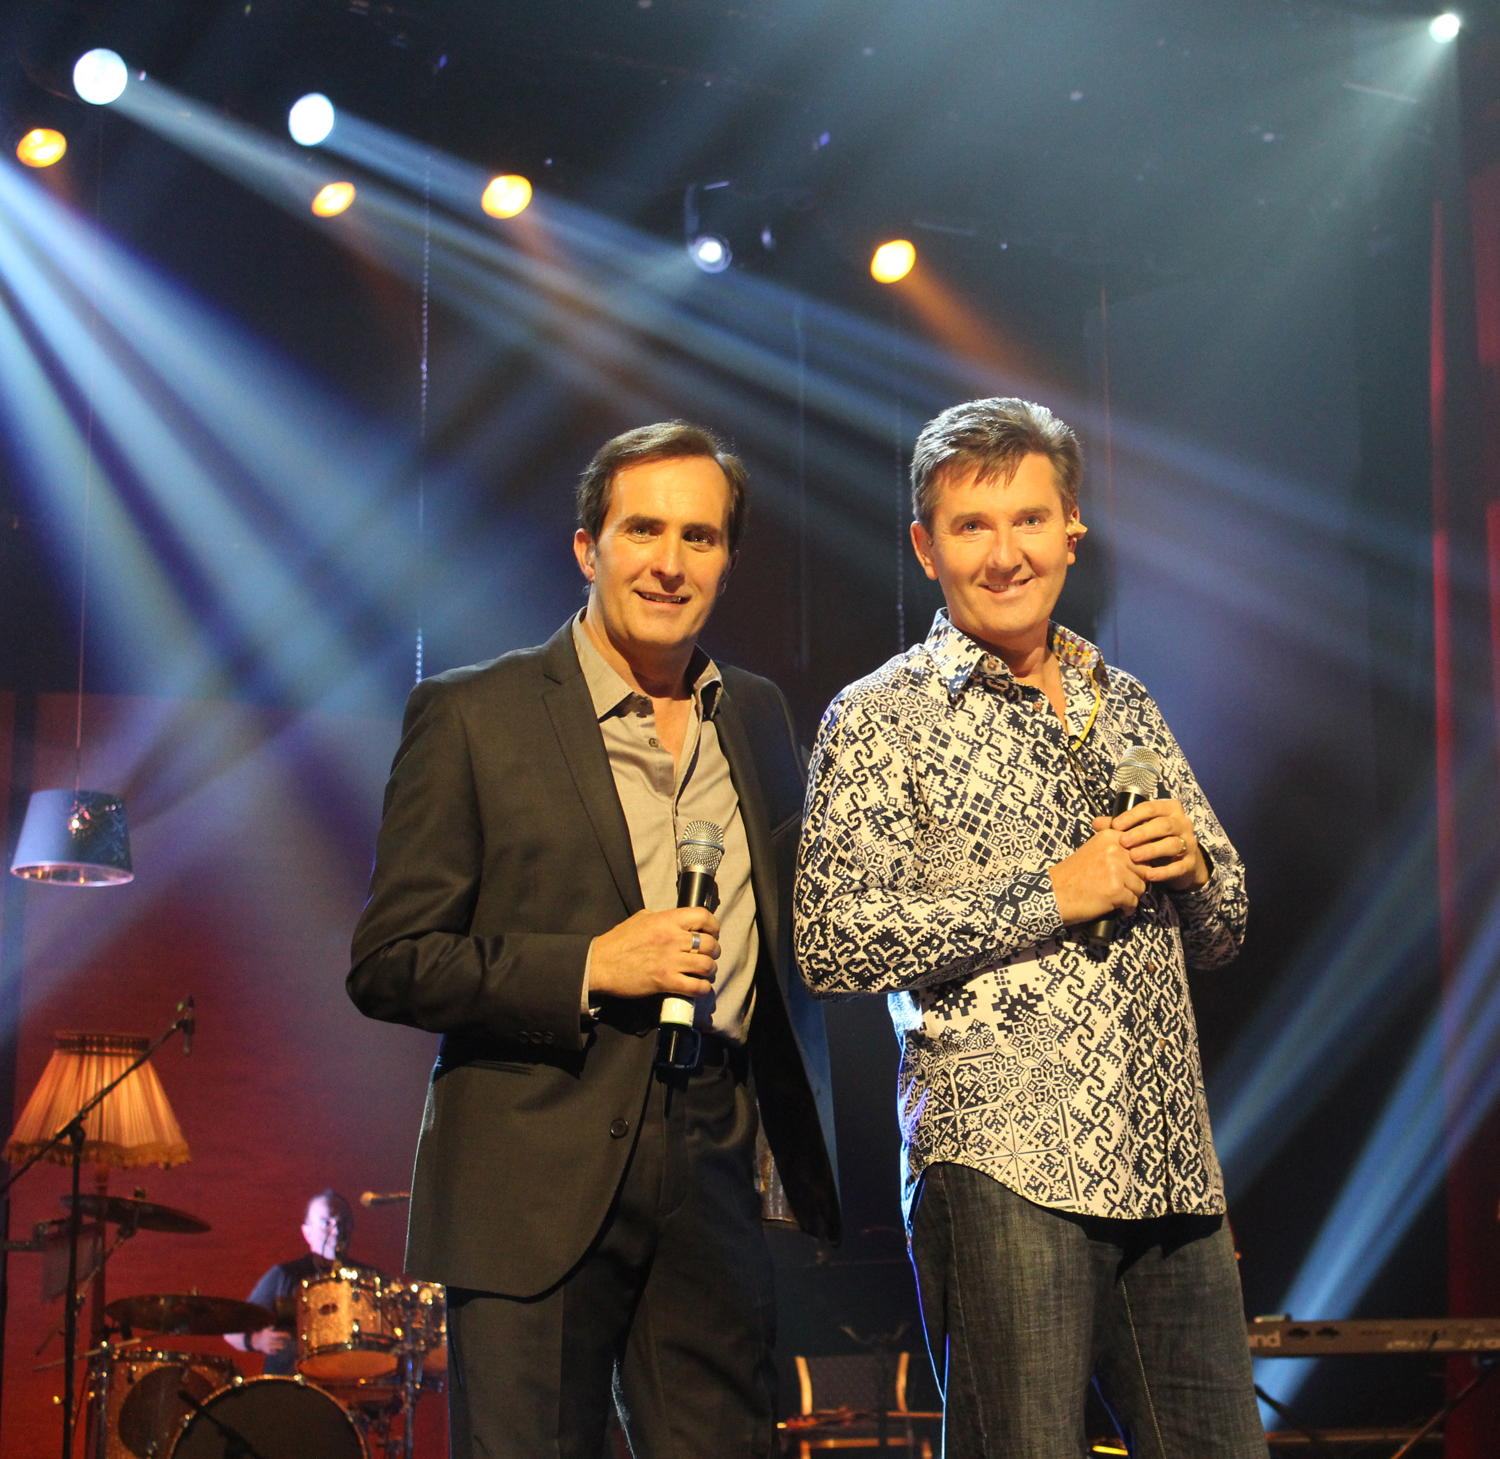 Marc with Daniel O'Donnell, presenting the TV show